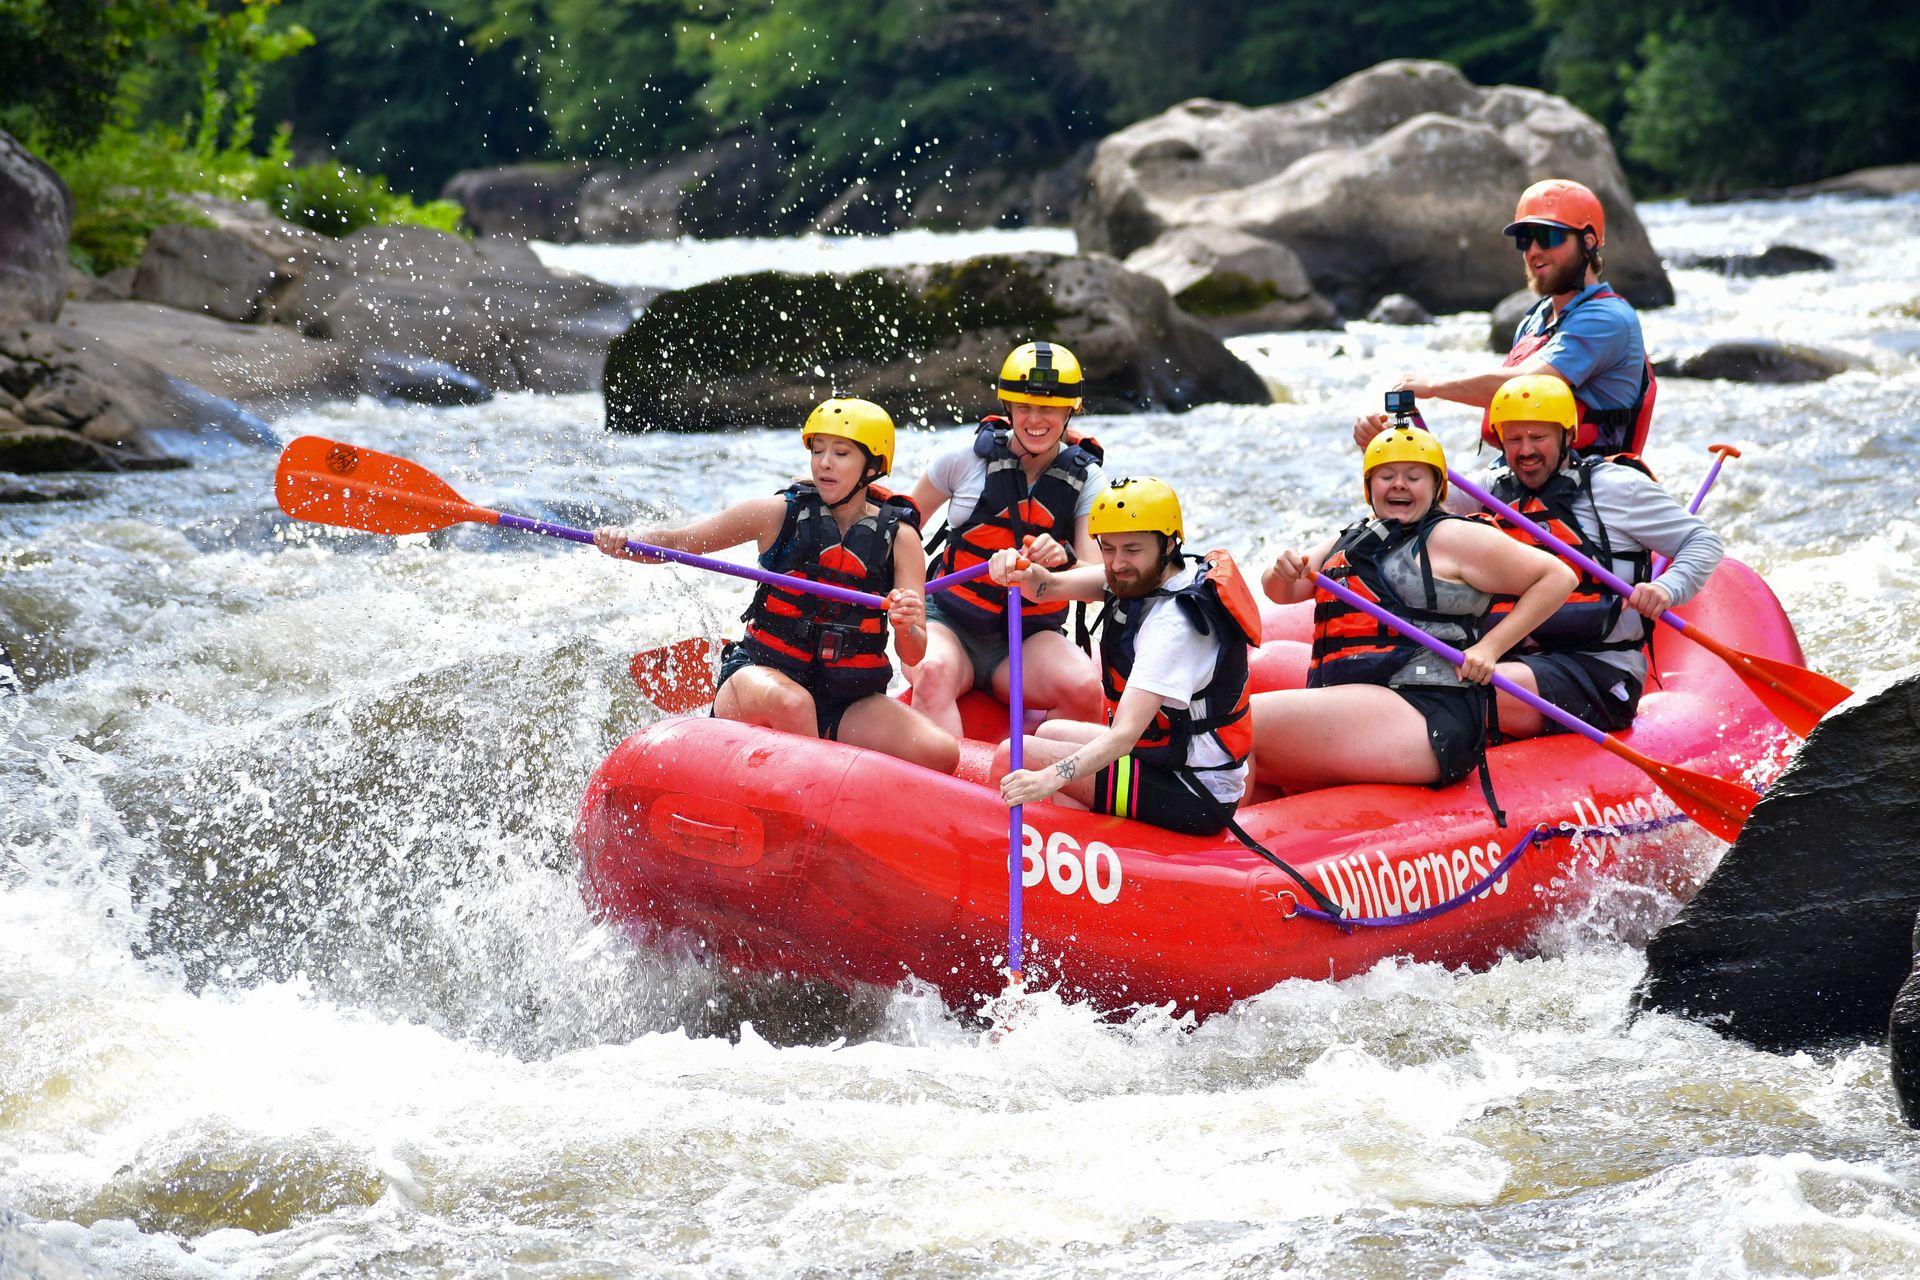 Lydia and 5 others on a whitewater rafting trip in Ohiopyle. The rafting is going down a small waterfall.